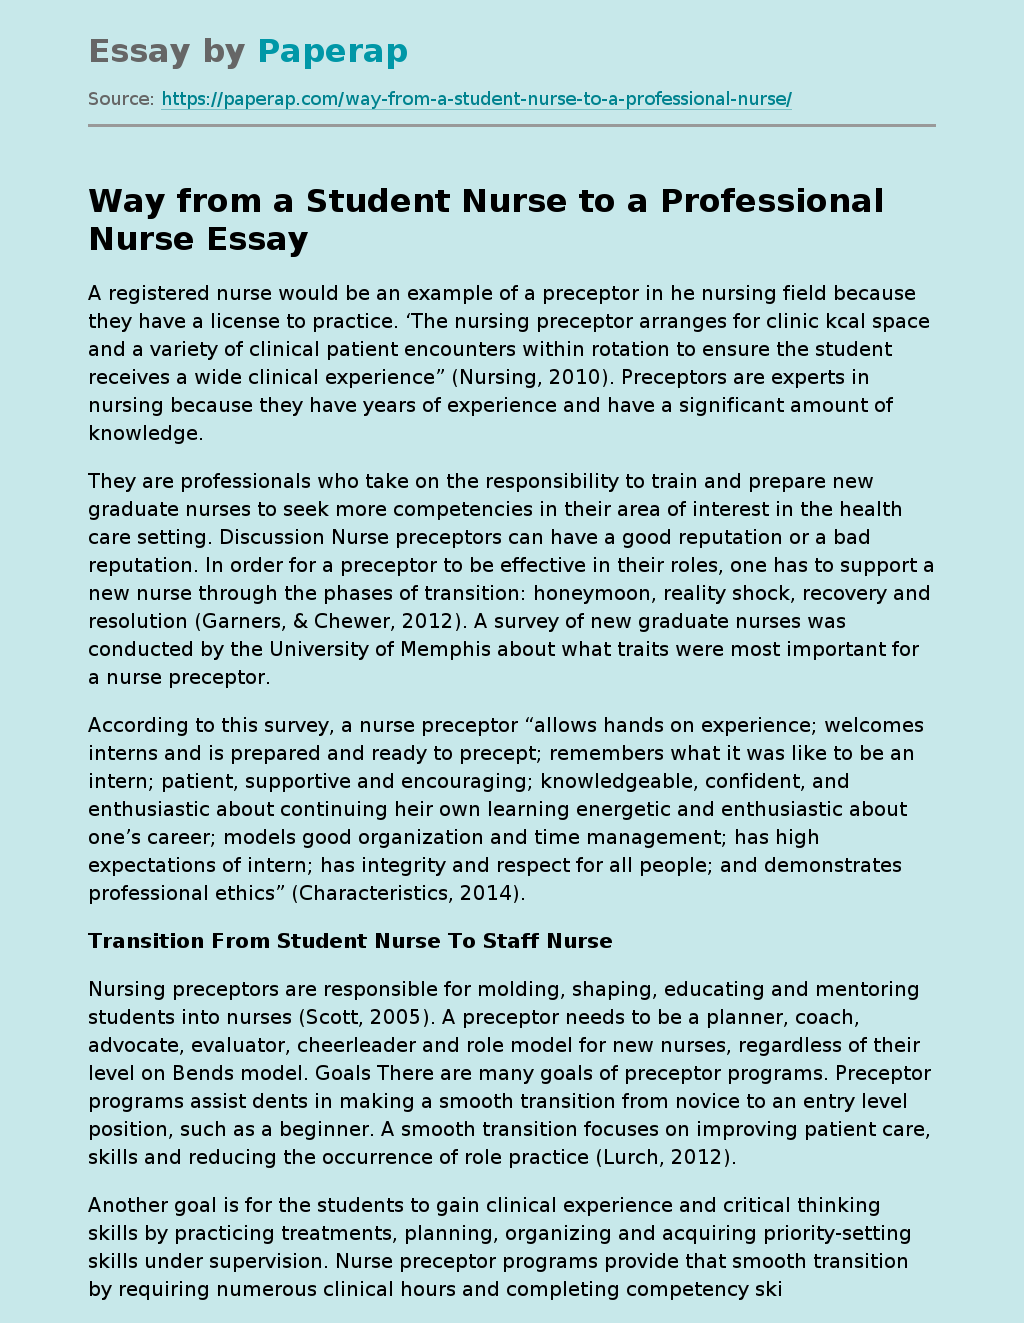 Way from a Student Nurse to a Professional Nurse